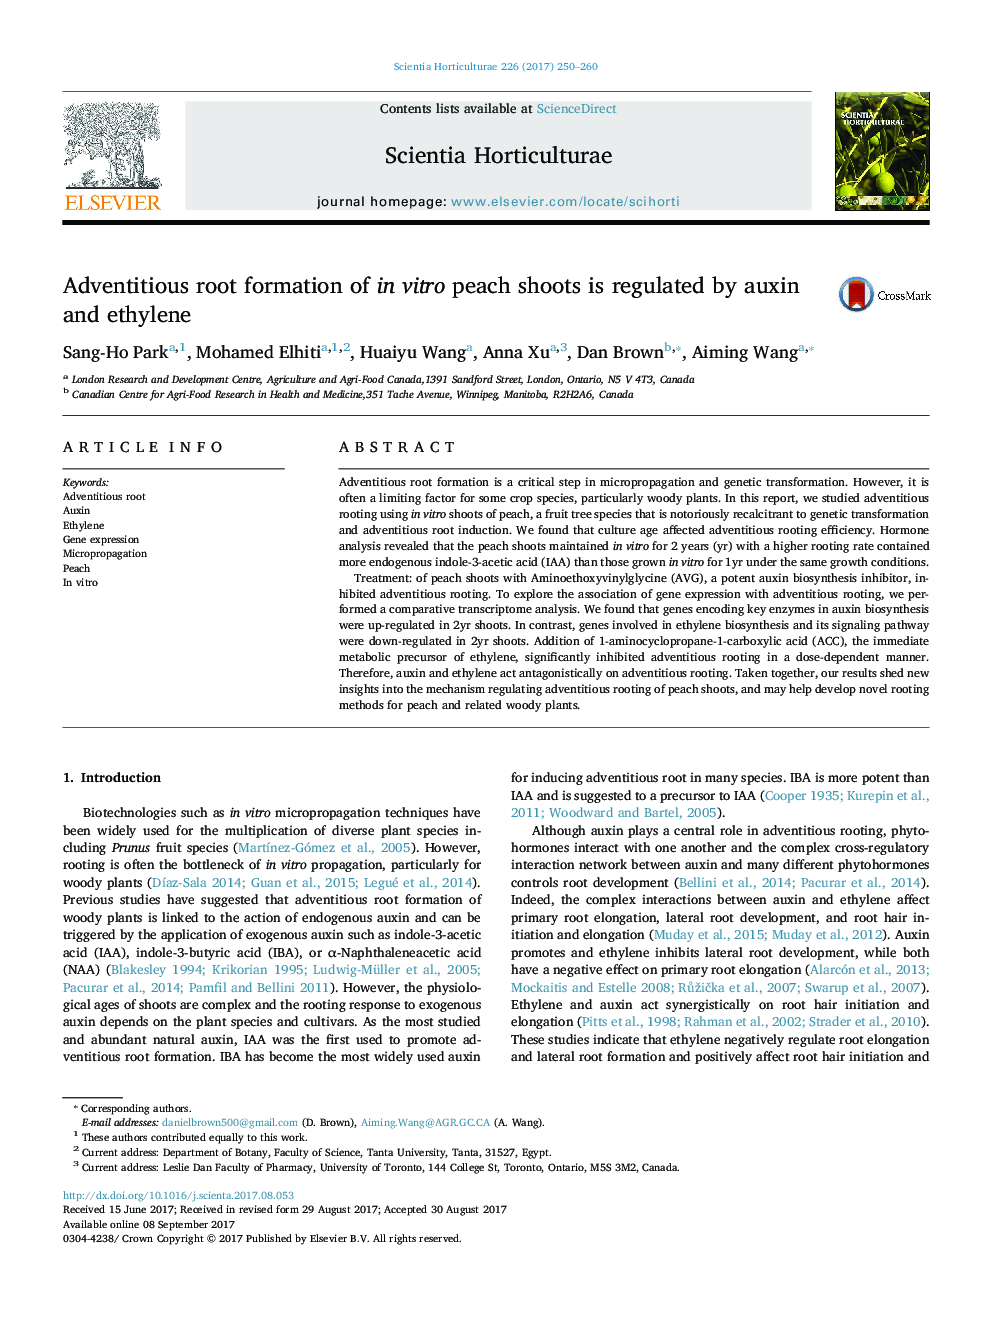 Adventitious root formation of in vitro peach shoots is regulated by auxin and ethylene